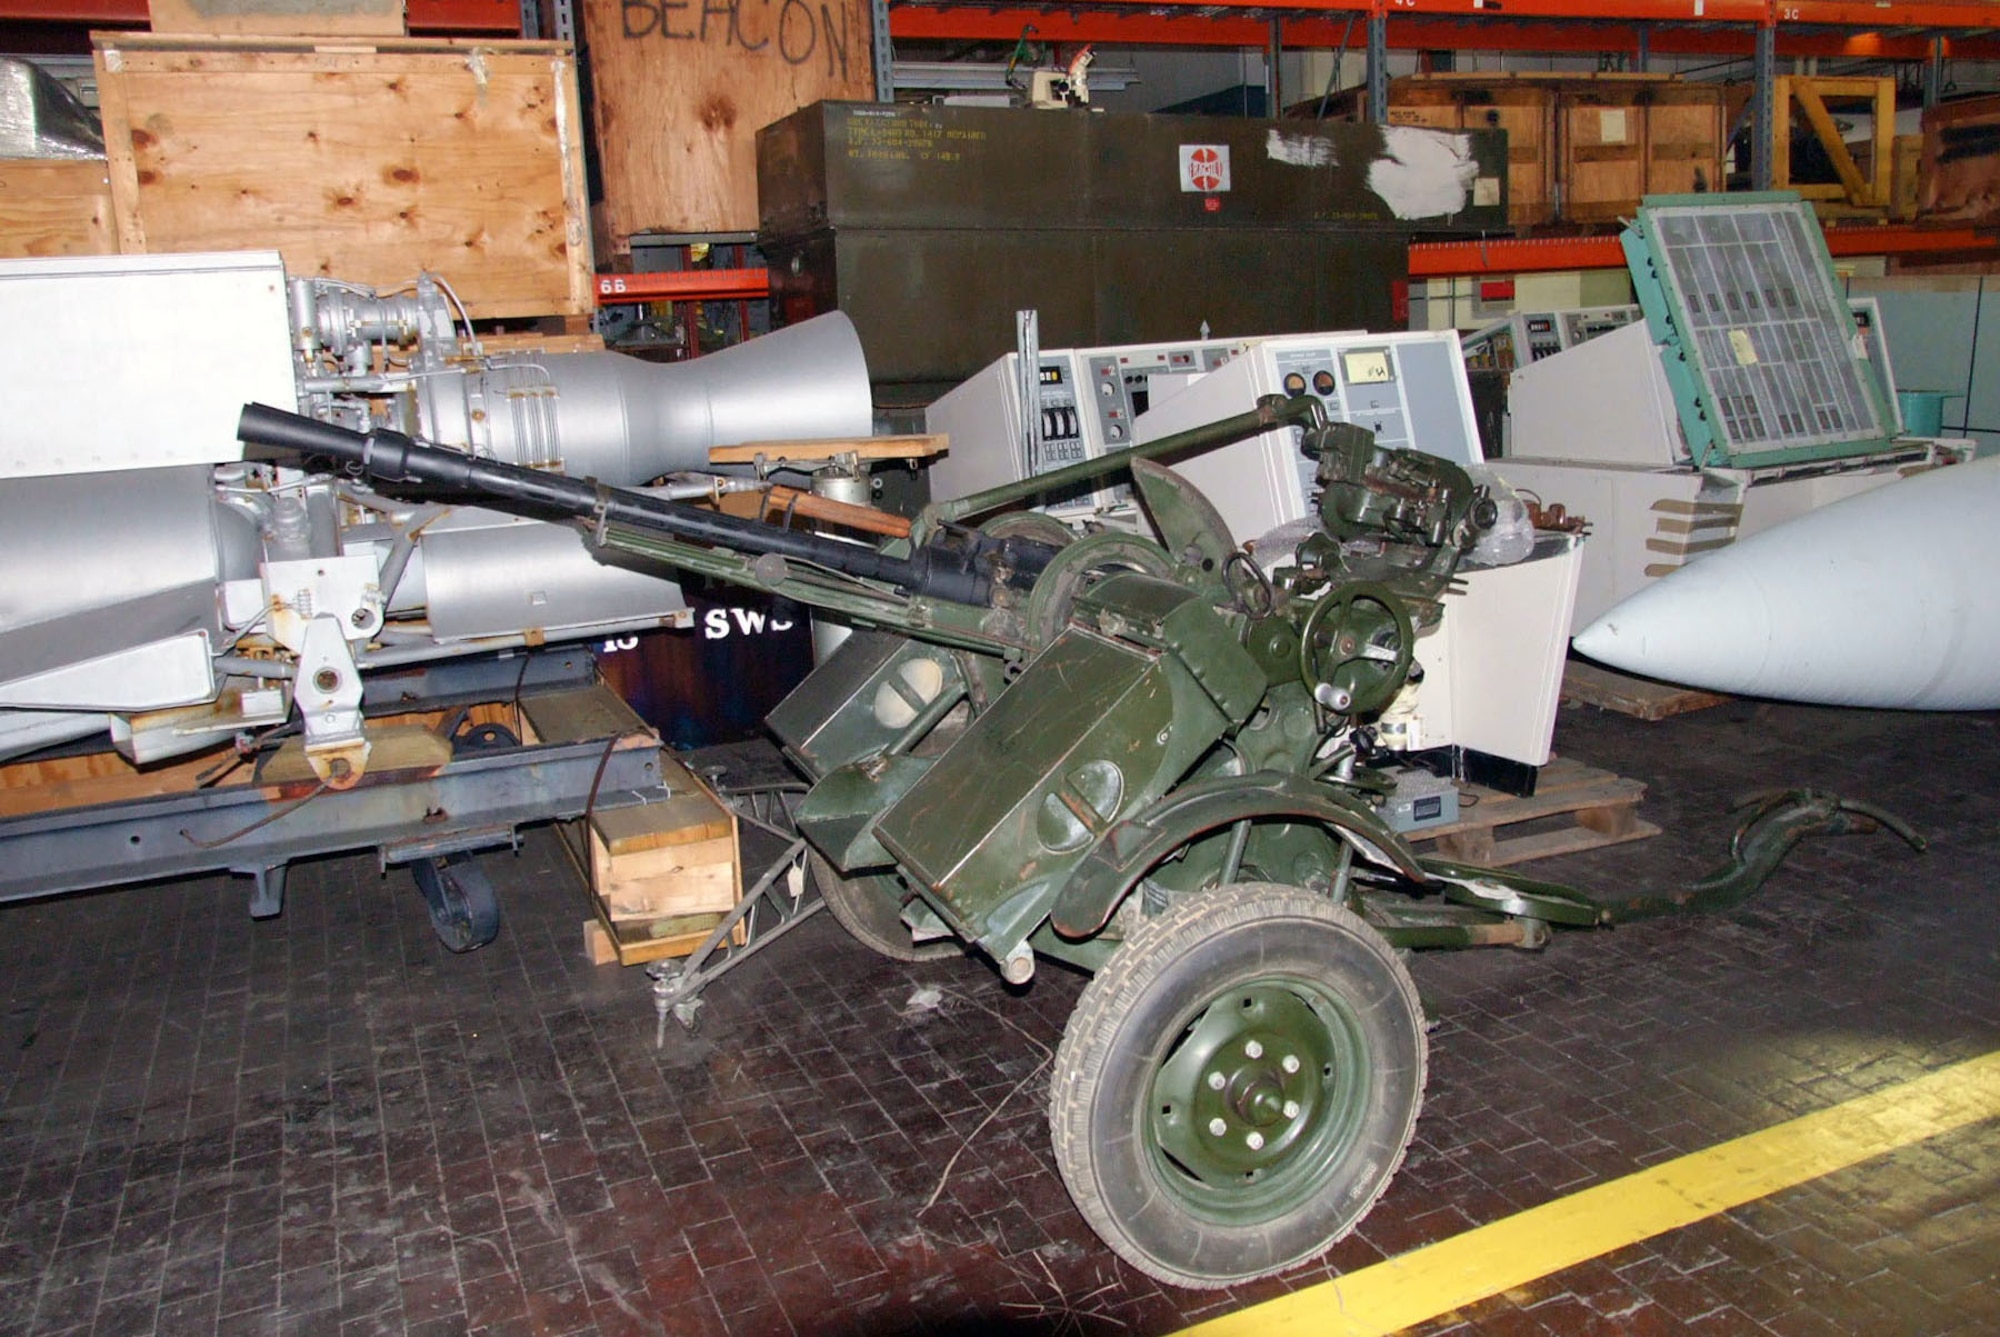 This Soviet-built ZPU-2 14.5mm anti-aircraft gun was captured by Allied forces during Operation Desert Storm. It is composed of two KPV 14.5mm heavy machine guns mounted on a two-wheeled carriage for mobility. Each gun is capable of firing 600 rounds per minute. Note the battle damage bullet holes on the lower part of the gun mount. (U.S. Air Force photo)